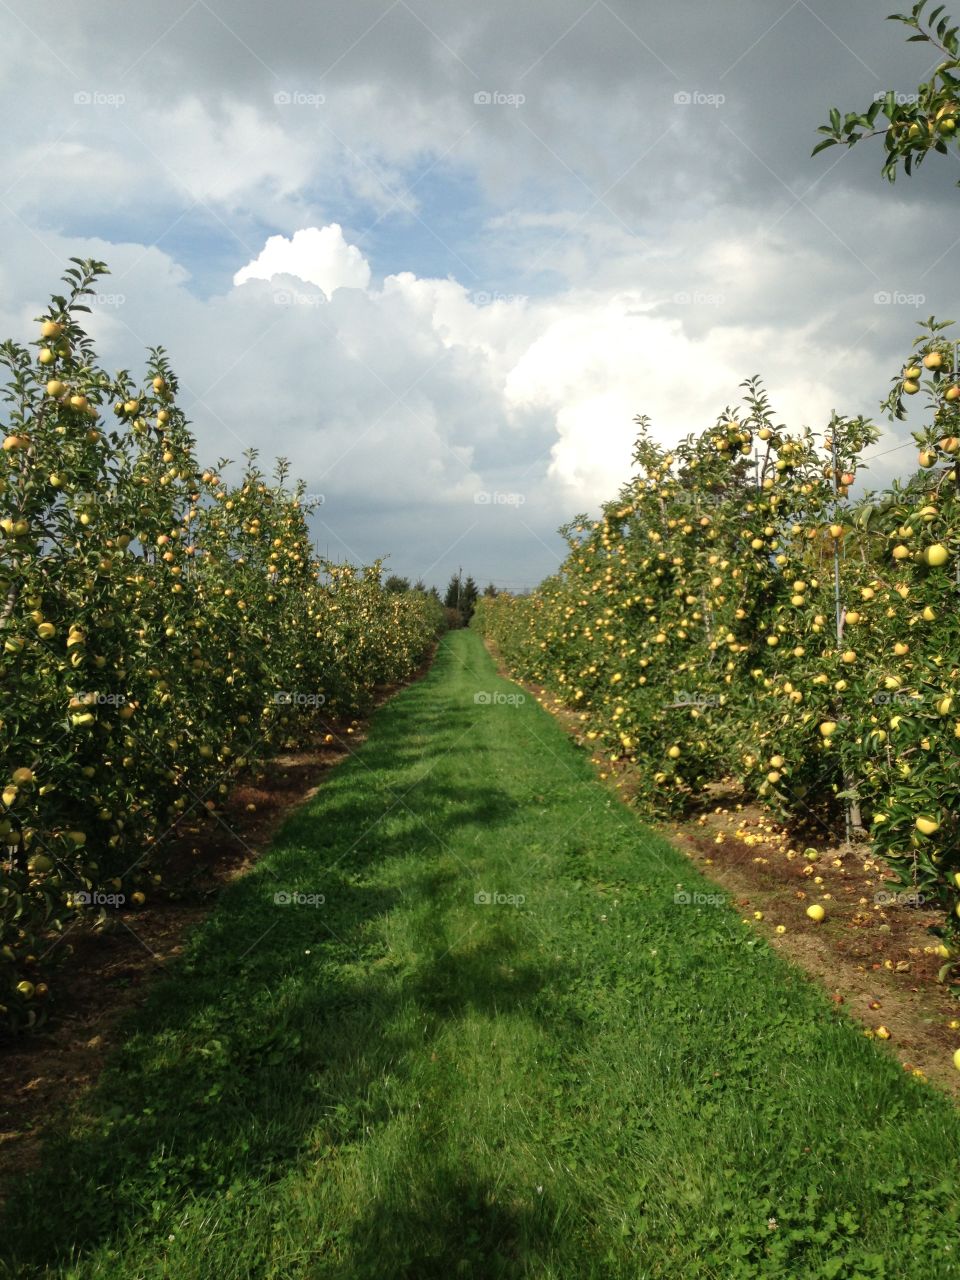 Apple orchard. A row of apple trees at the apple orchard during the fall 